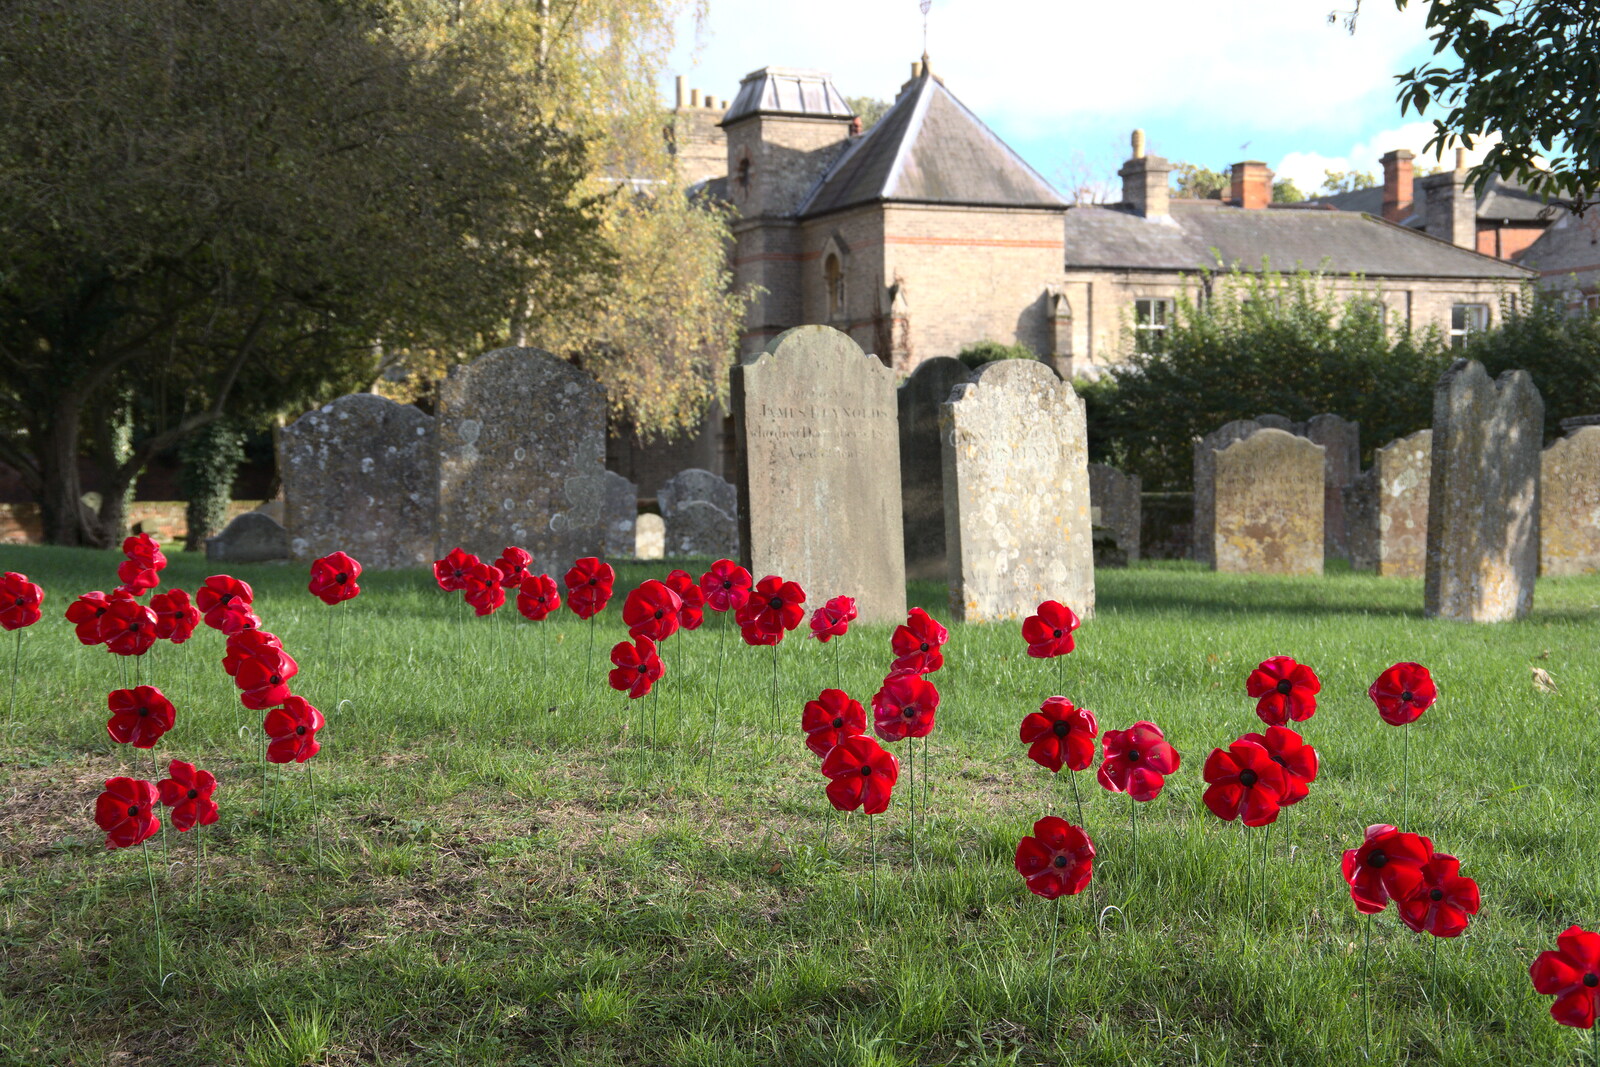 A Postcard from Flatford and Dedham, Suffolk and Essex, 9th November 2022: Artificial poppies wave around in the graveyard